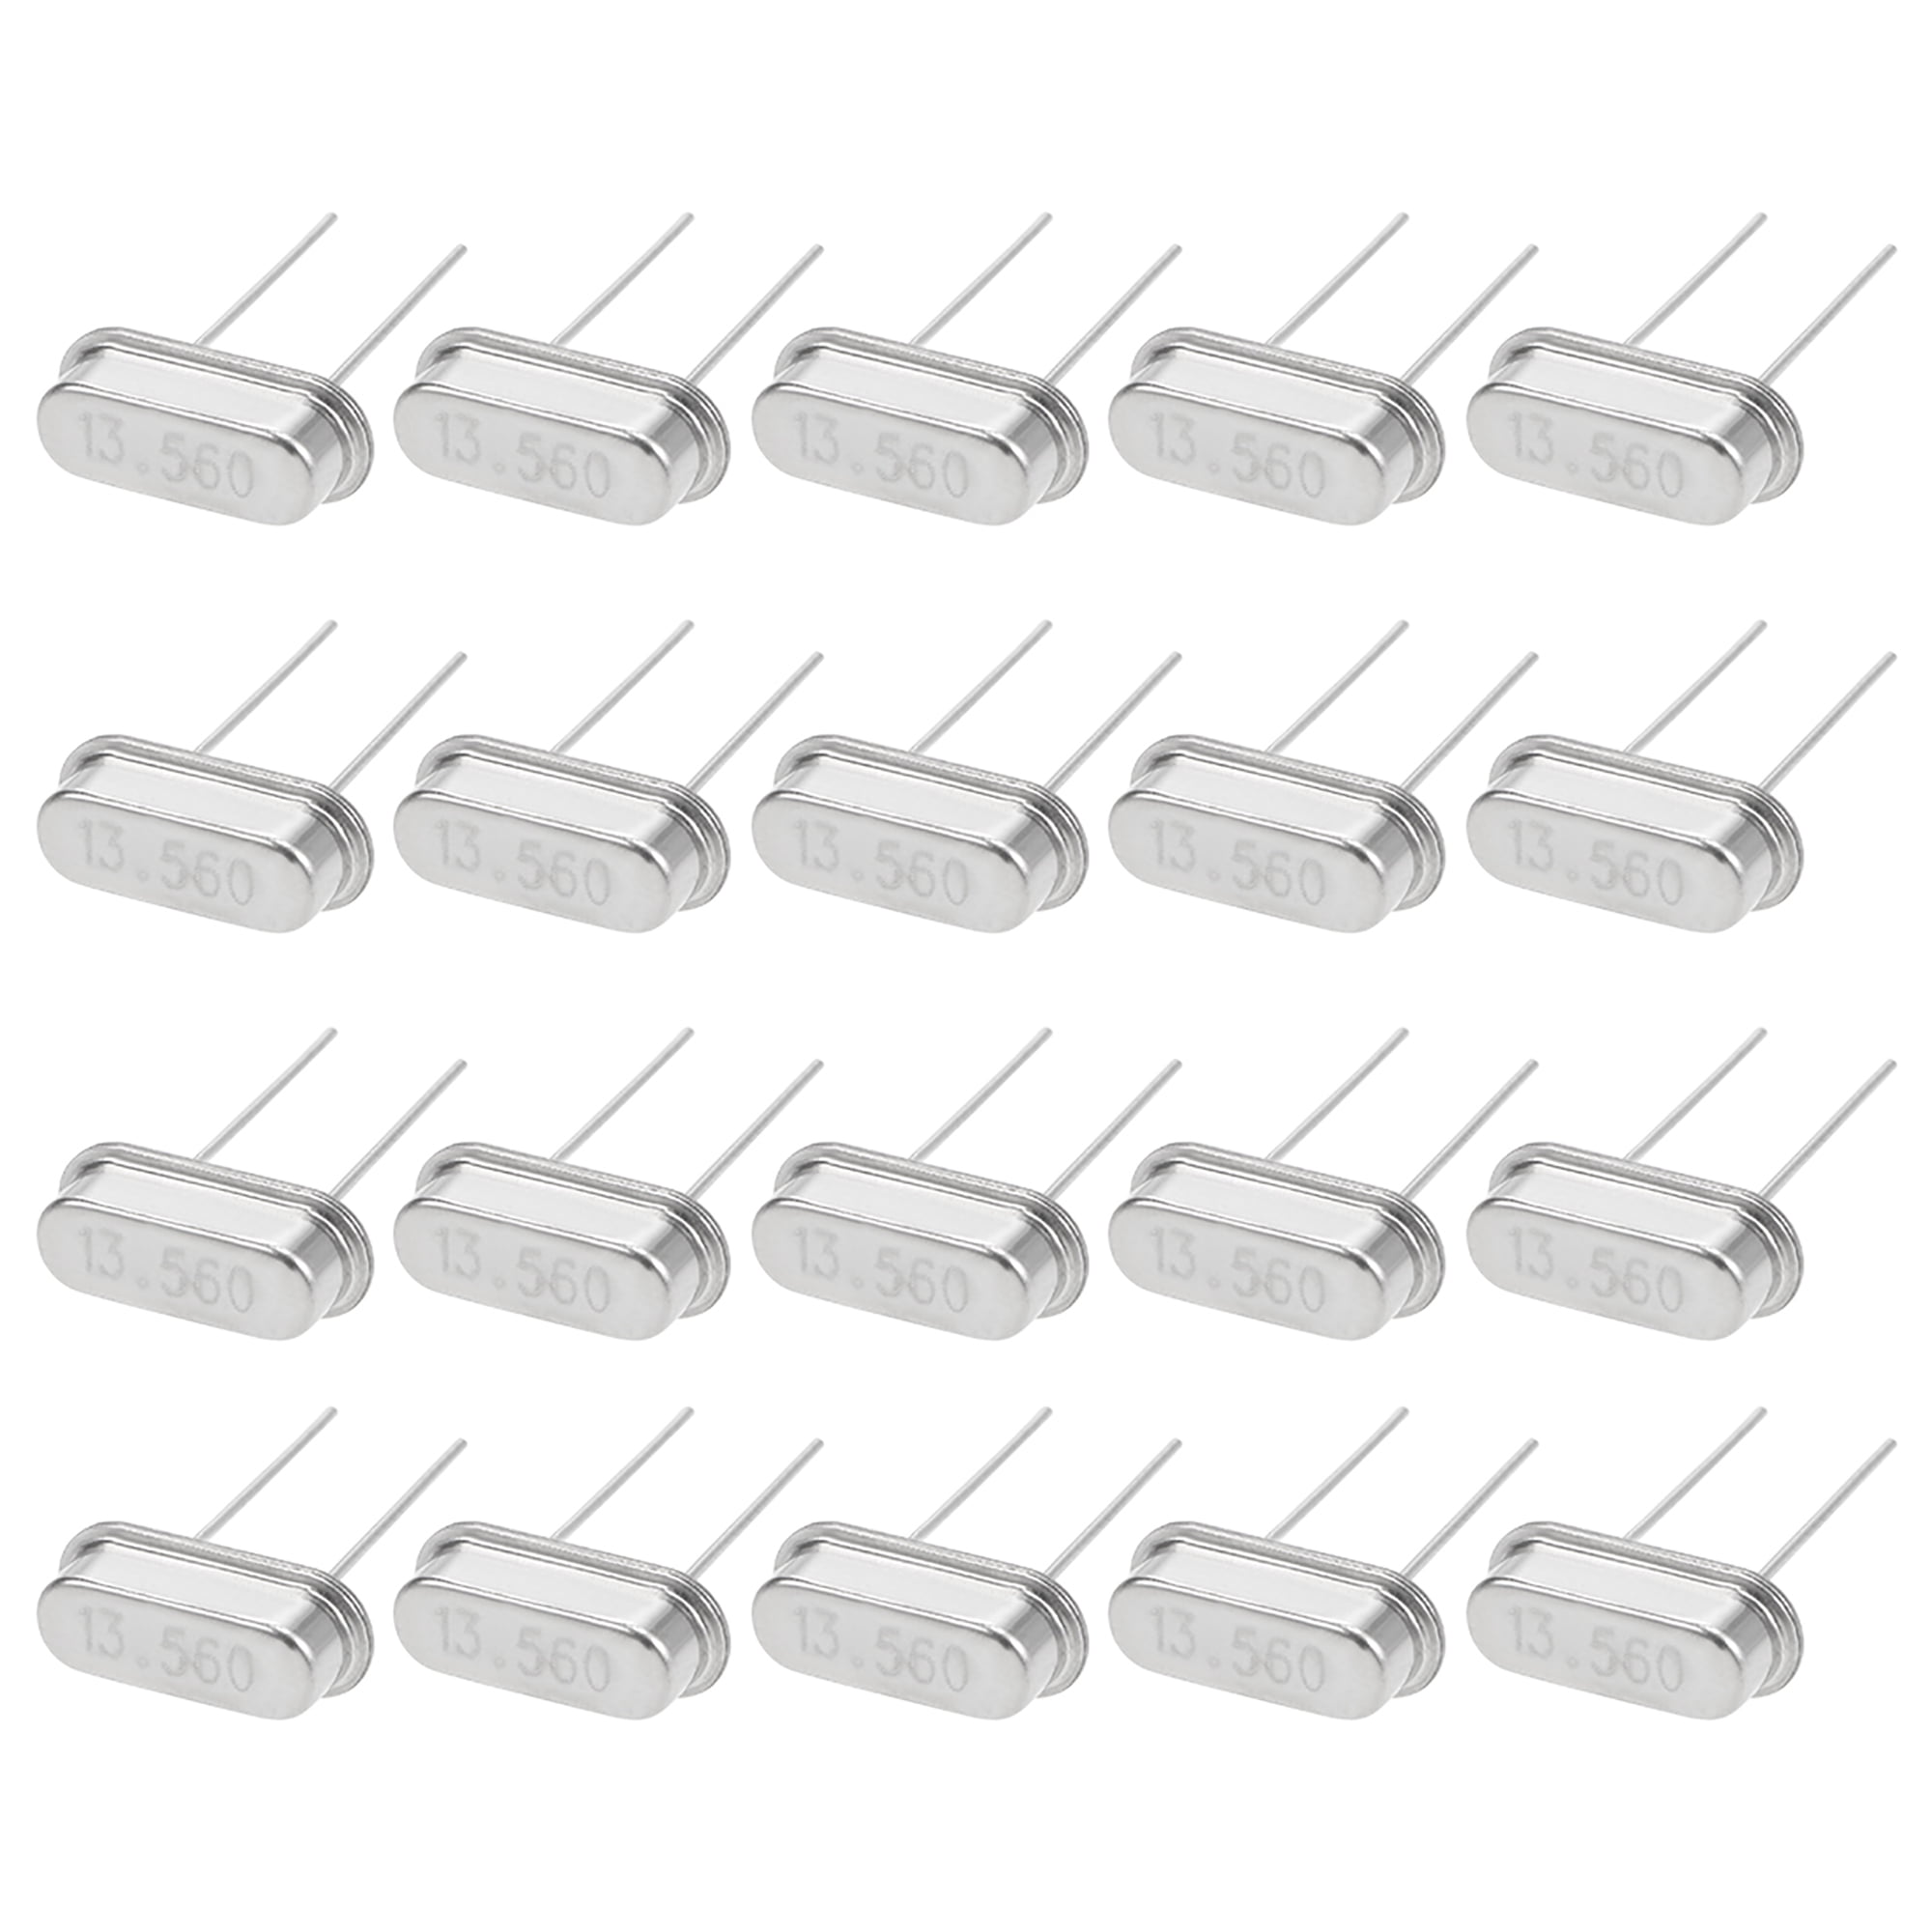 uxcell Office DIP Quartz Crystal Oscillator 20MHz Frequency 10 PCS Silver Tone 